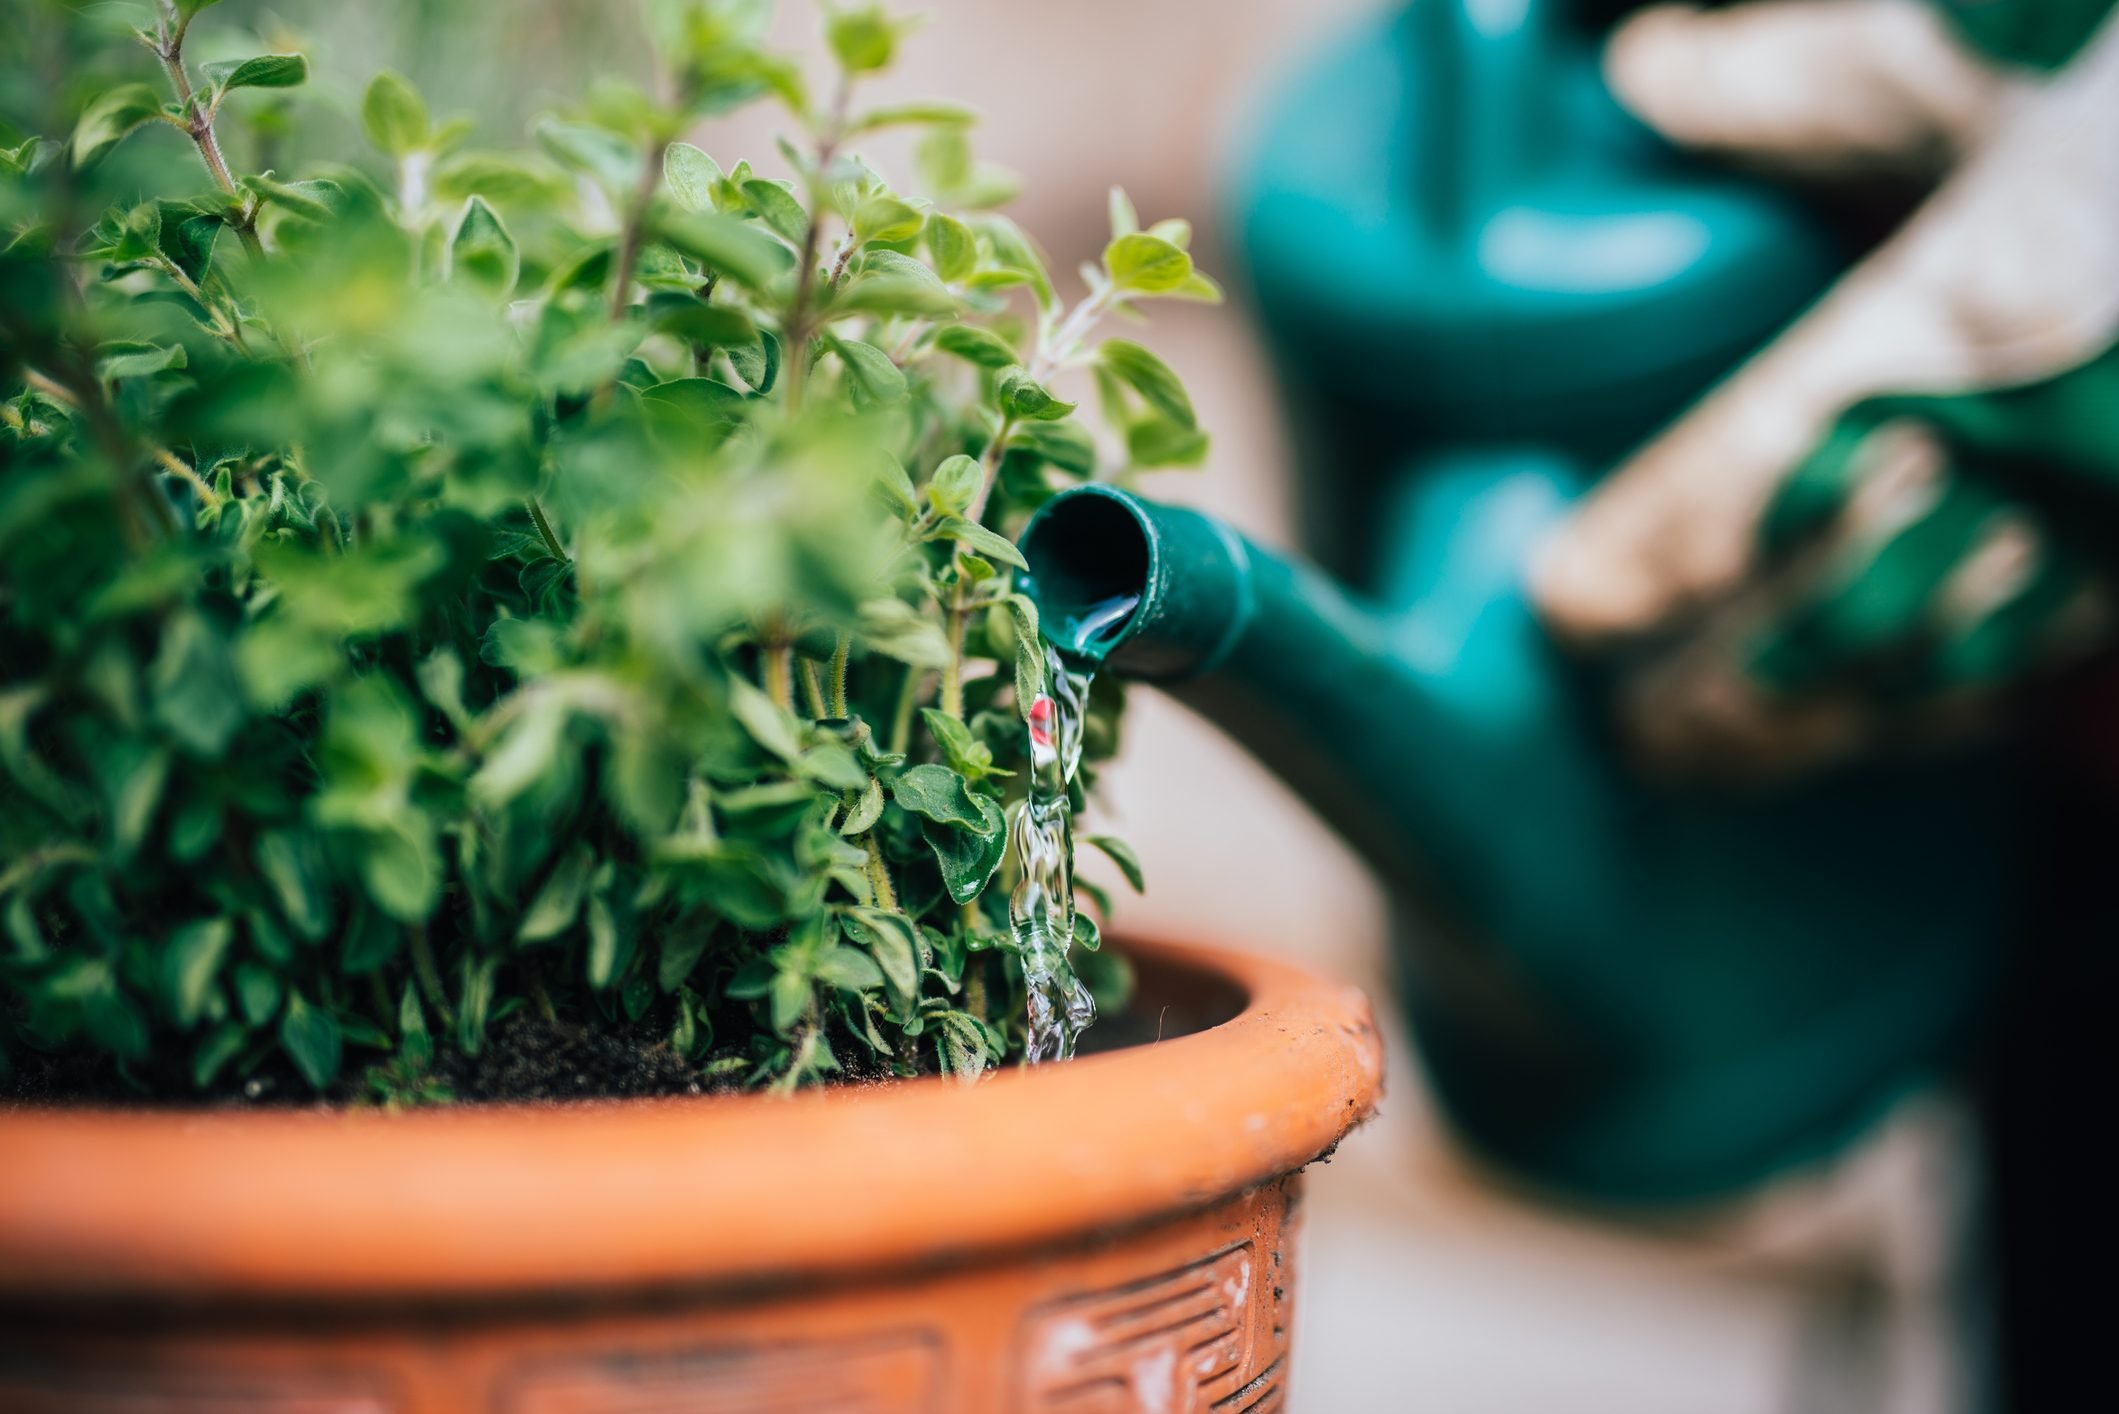 When Should You Stop Watering Your Plants in the Fall?